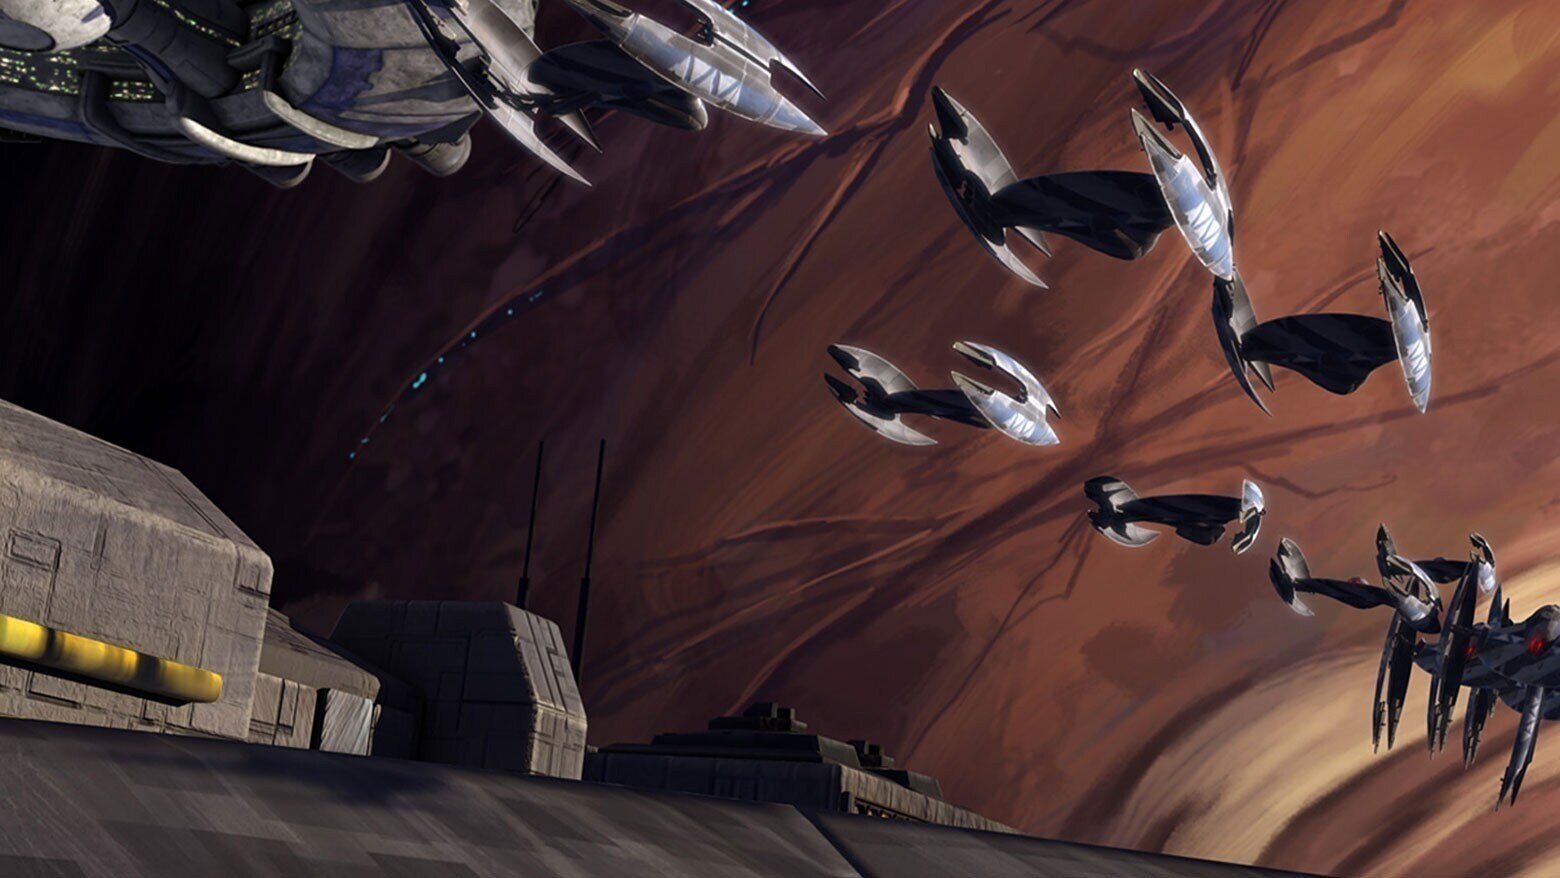 Planet Ryloth subjected to military occupation by the droid army of the Separatists in The Clone Wars